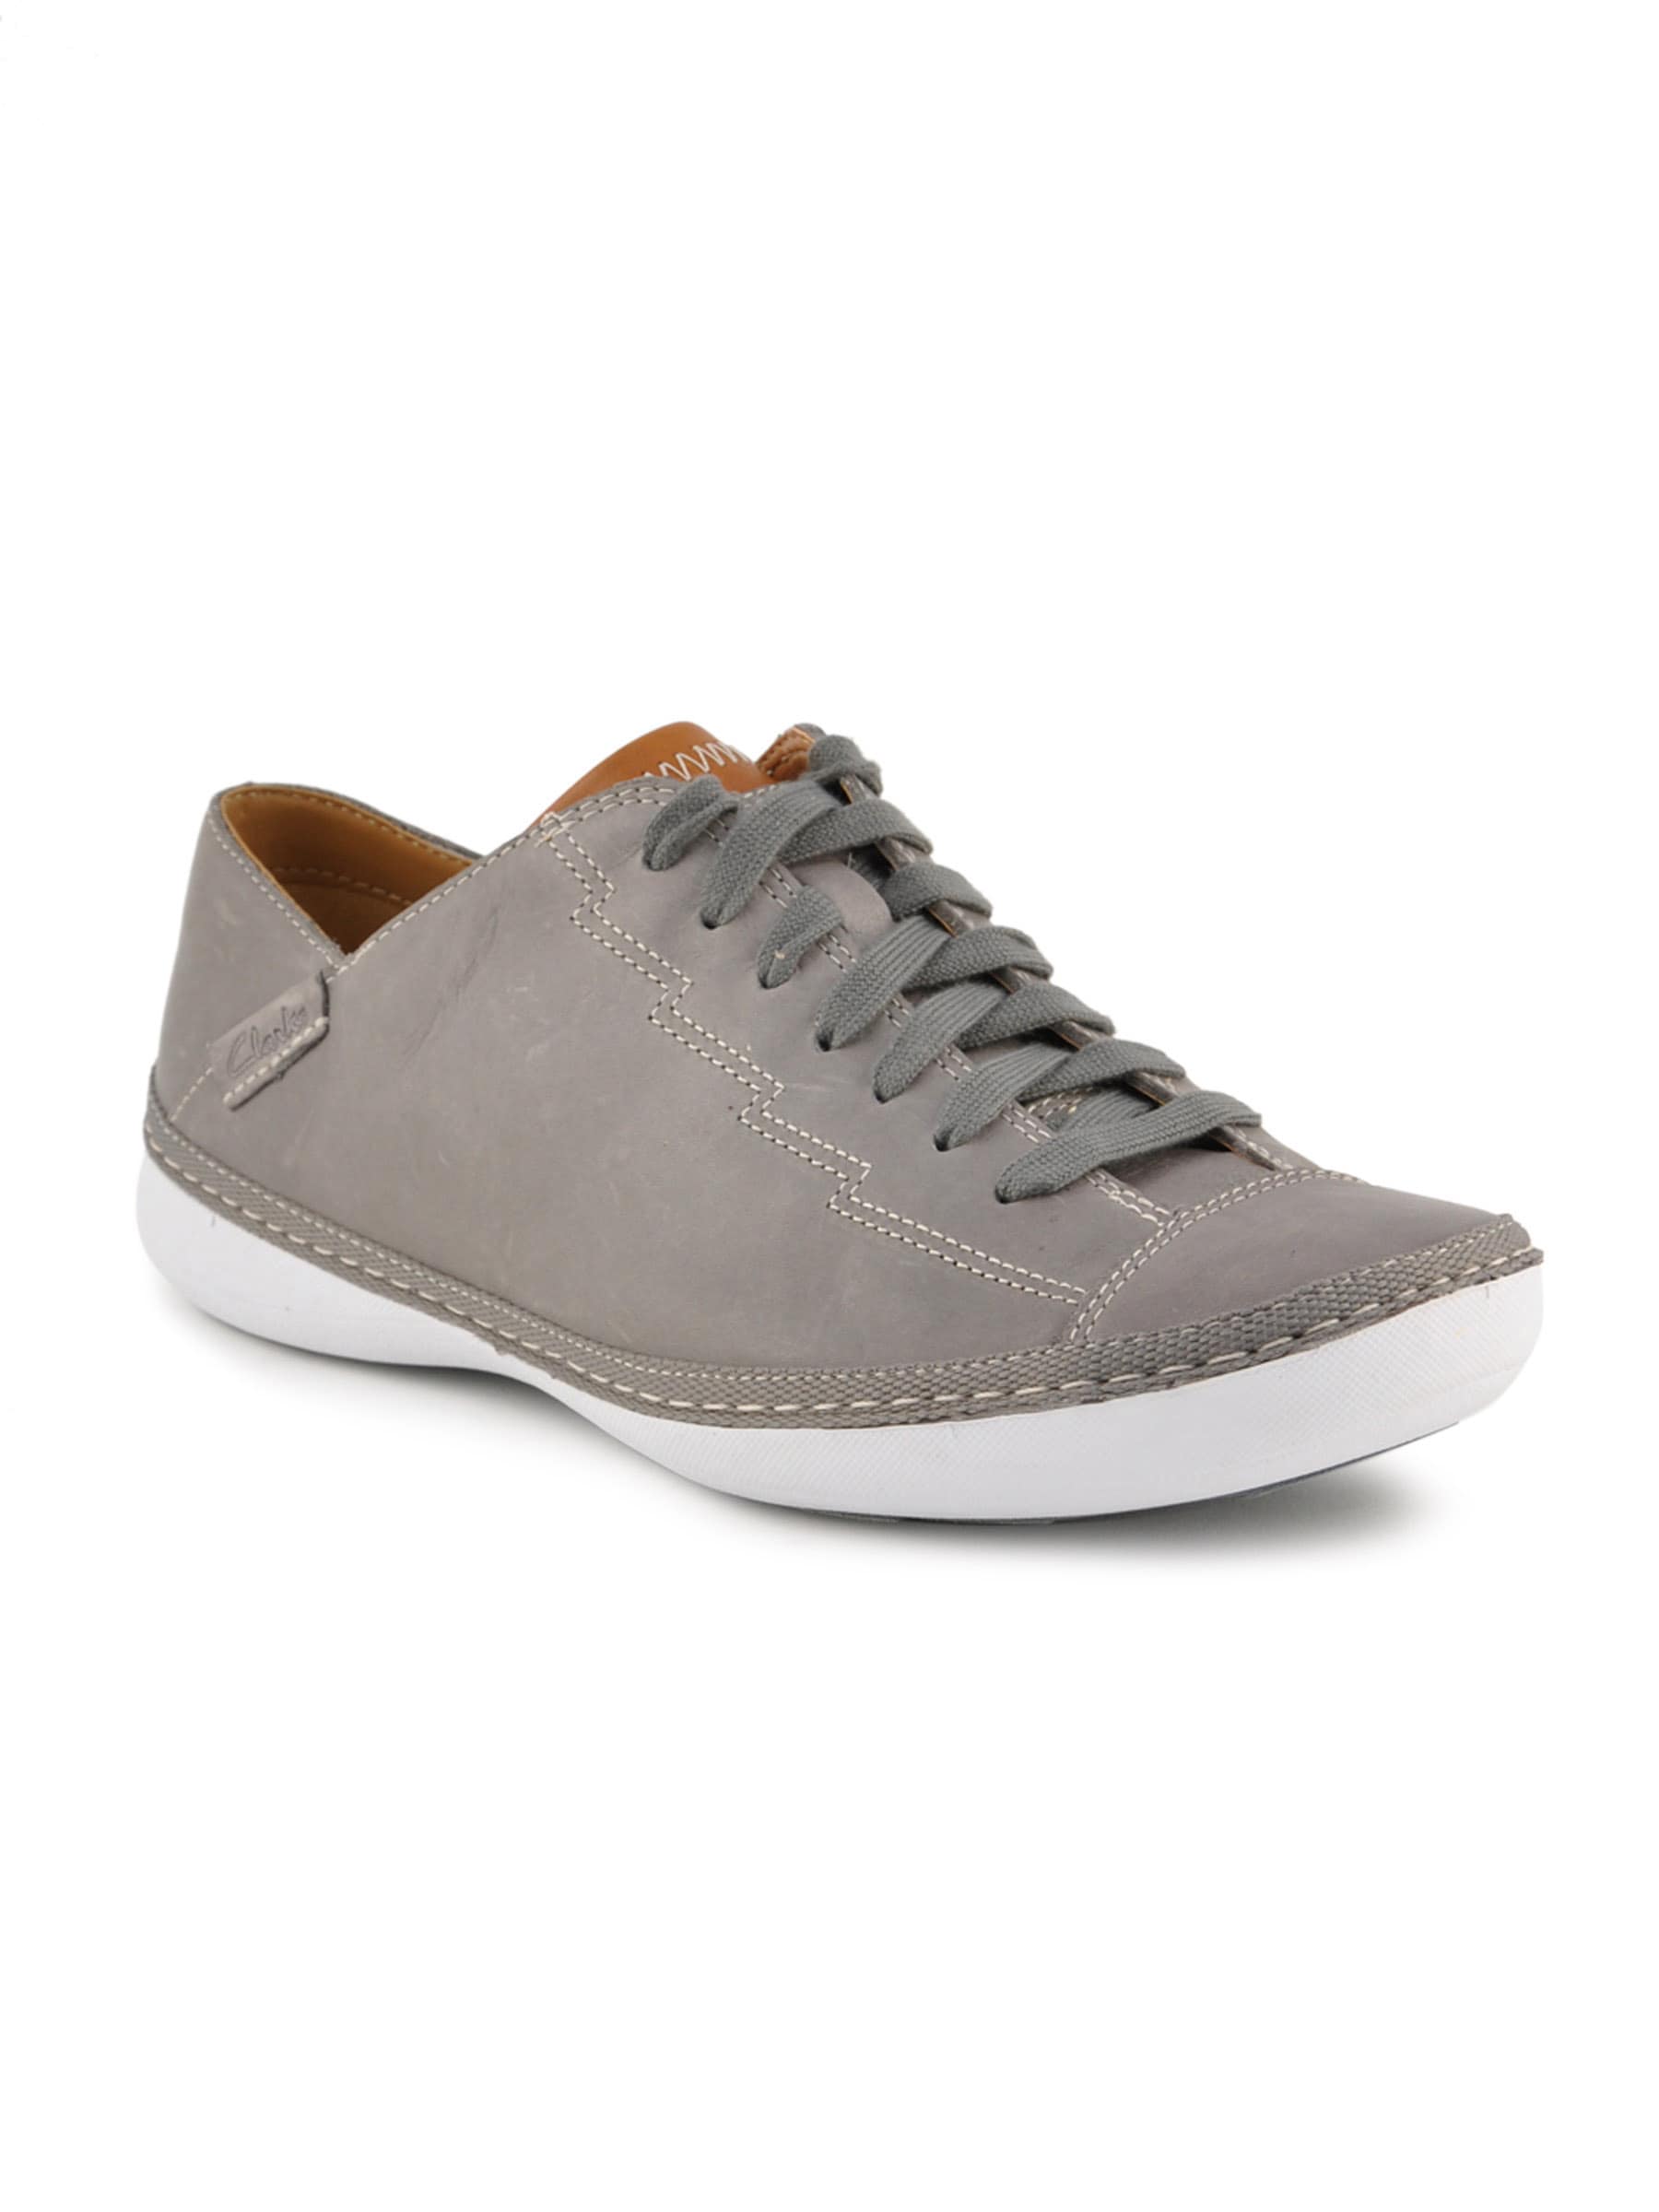 Clarks Men Rocco Fuse Leather Grey Casual Shoes